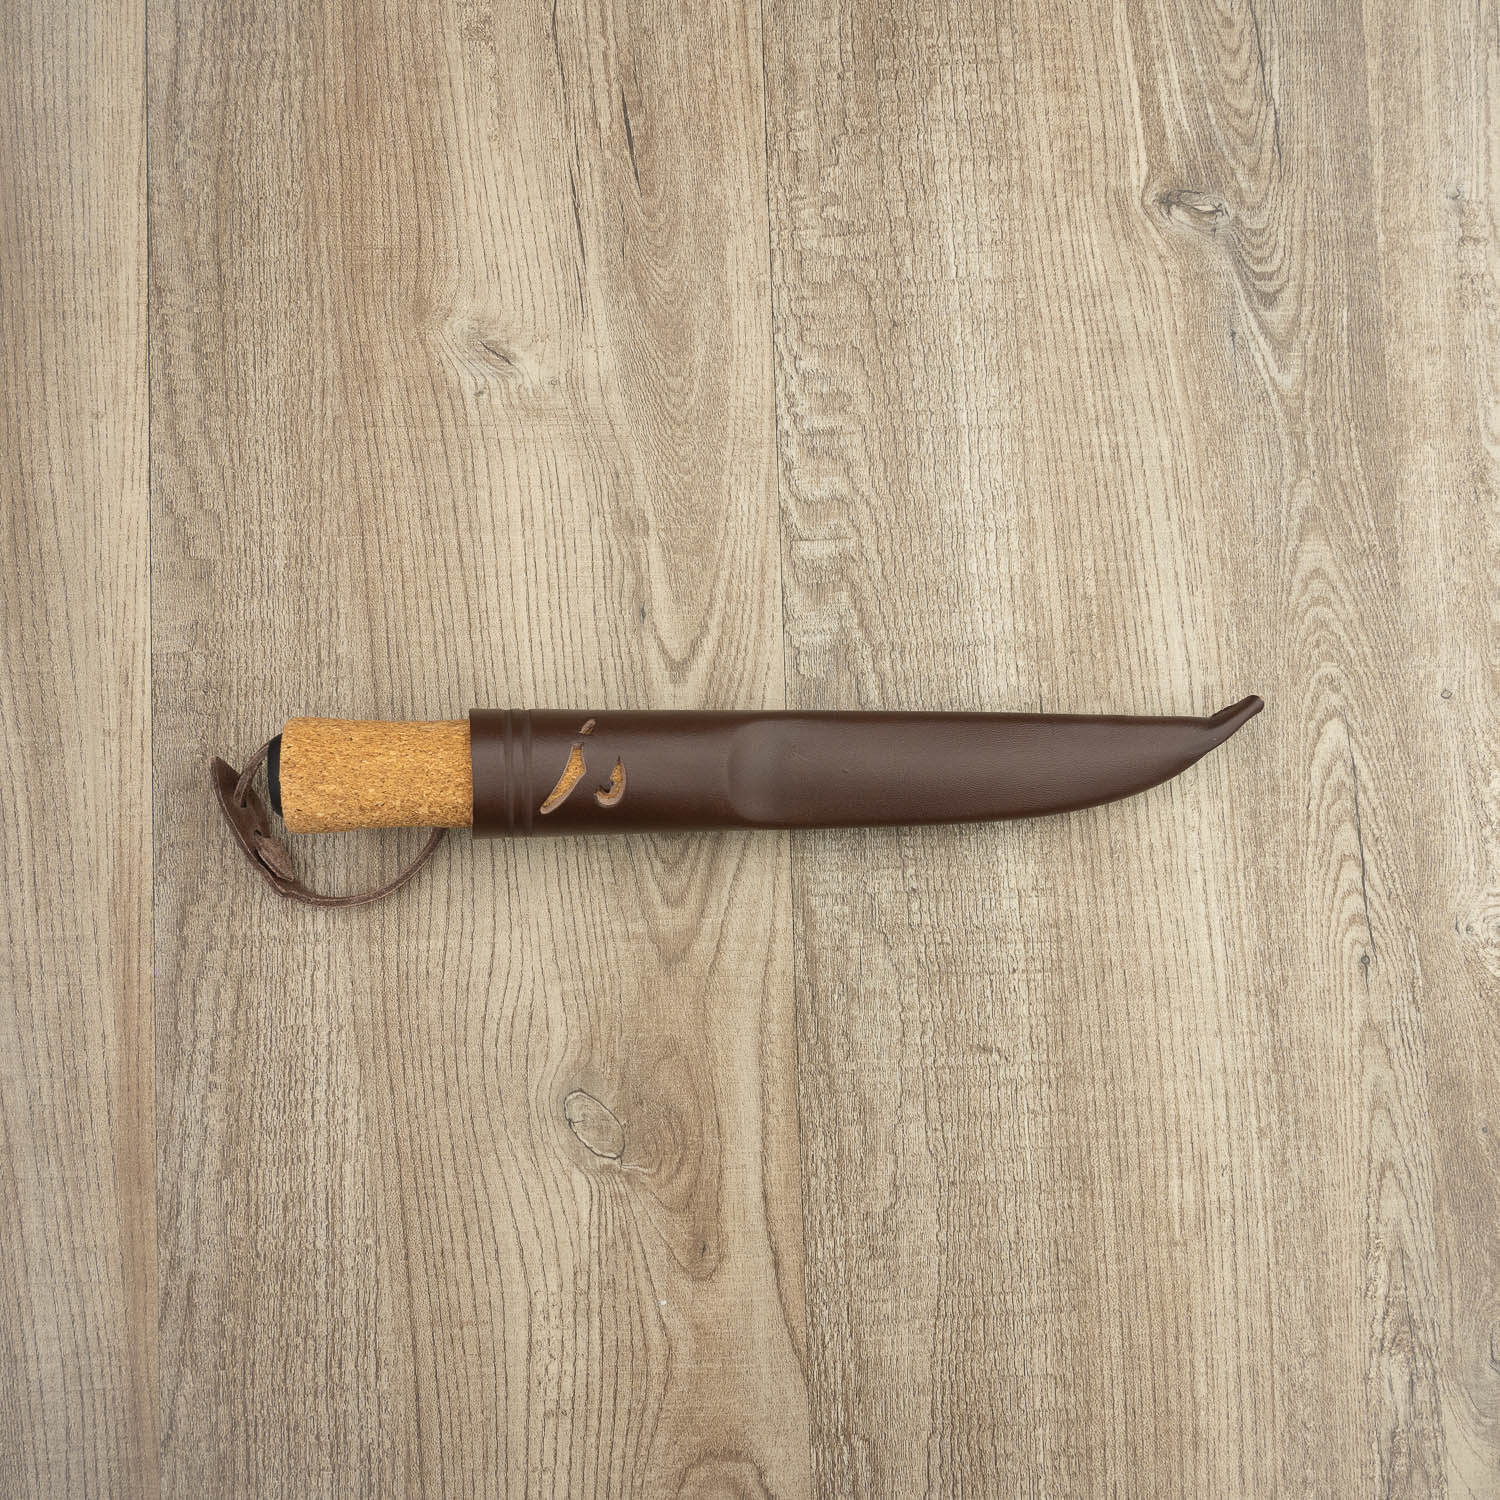 Helle Knives Hellefisk 123mm Fishing and Hunting Knife from Helle